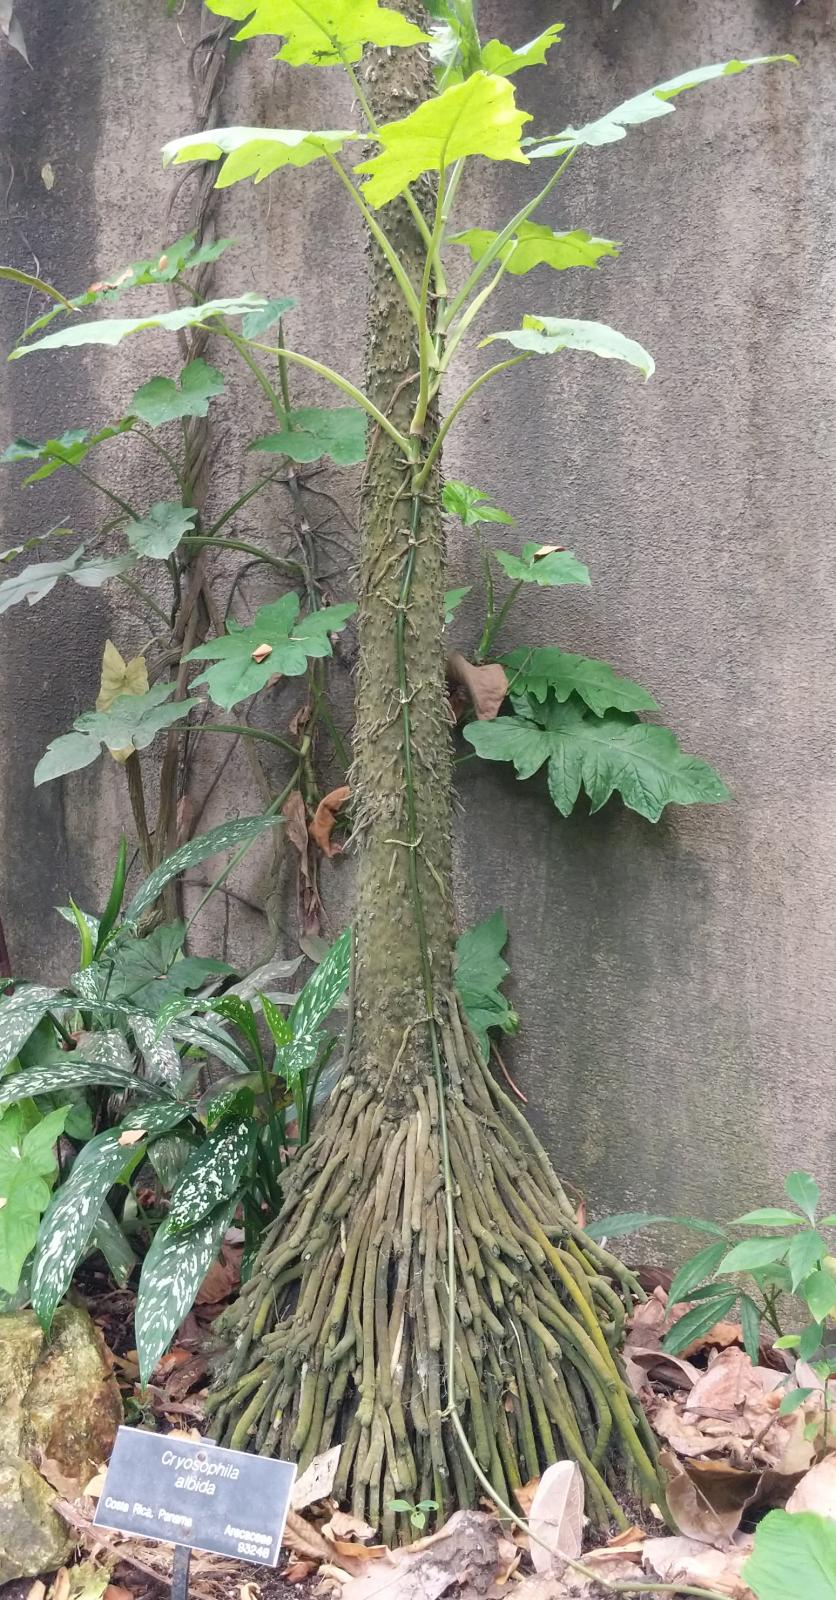 Tree growing in front of a concrete wall. The tree is growing out of the frame of the photo. A green epiphyte is attached to the plant.